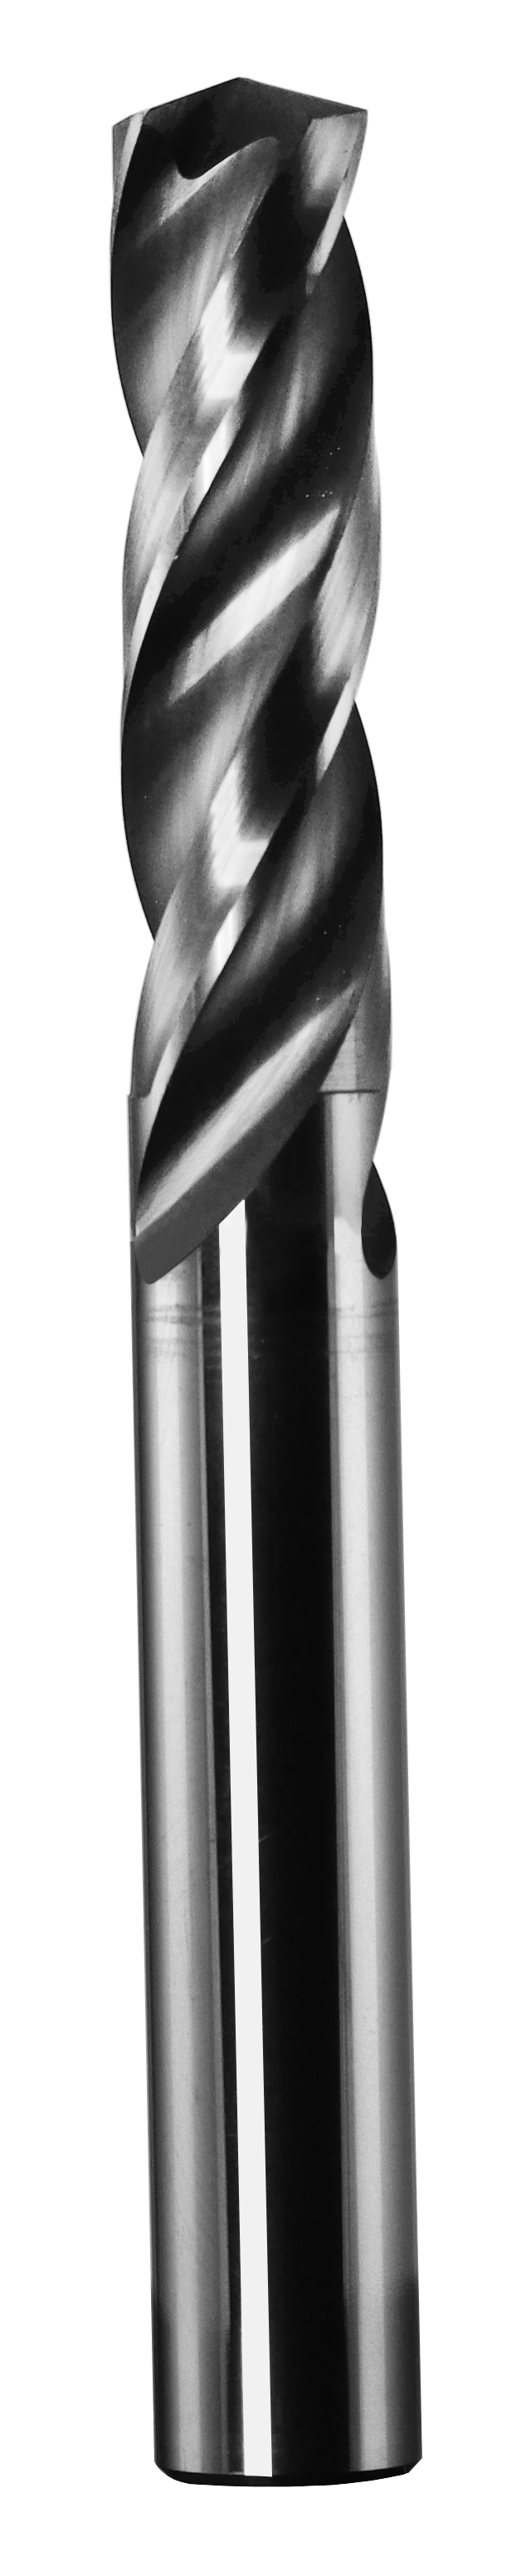 14.00mm Dia, 150 Degree Point, Solid Carbide Drill - 63038